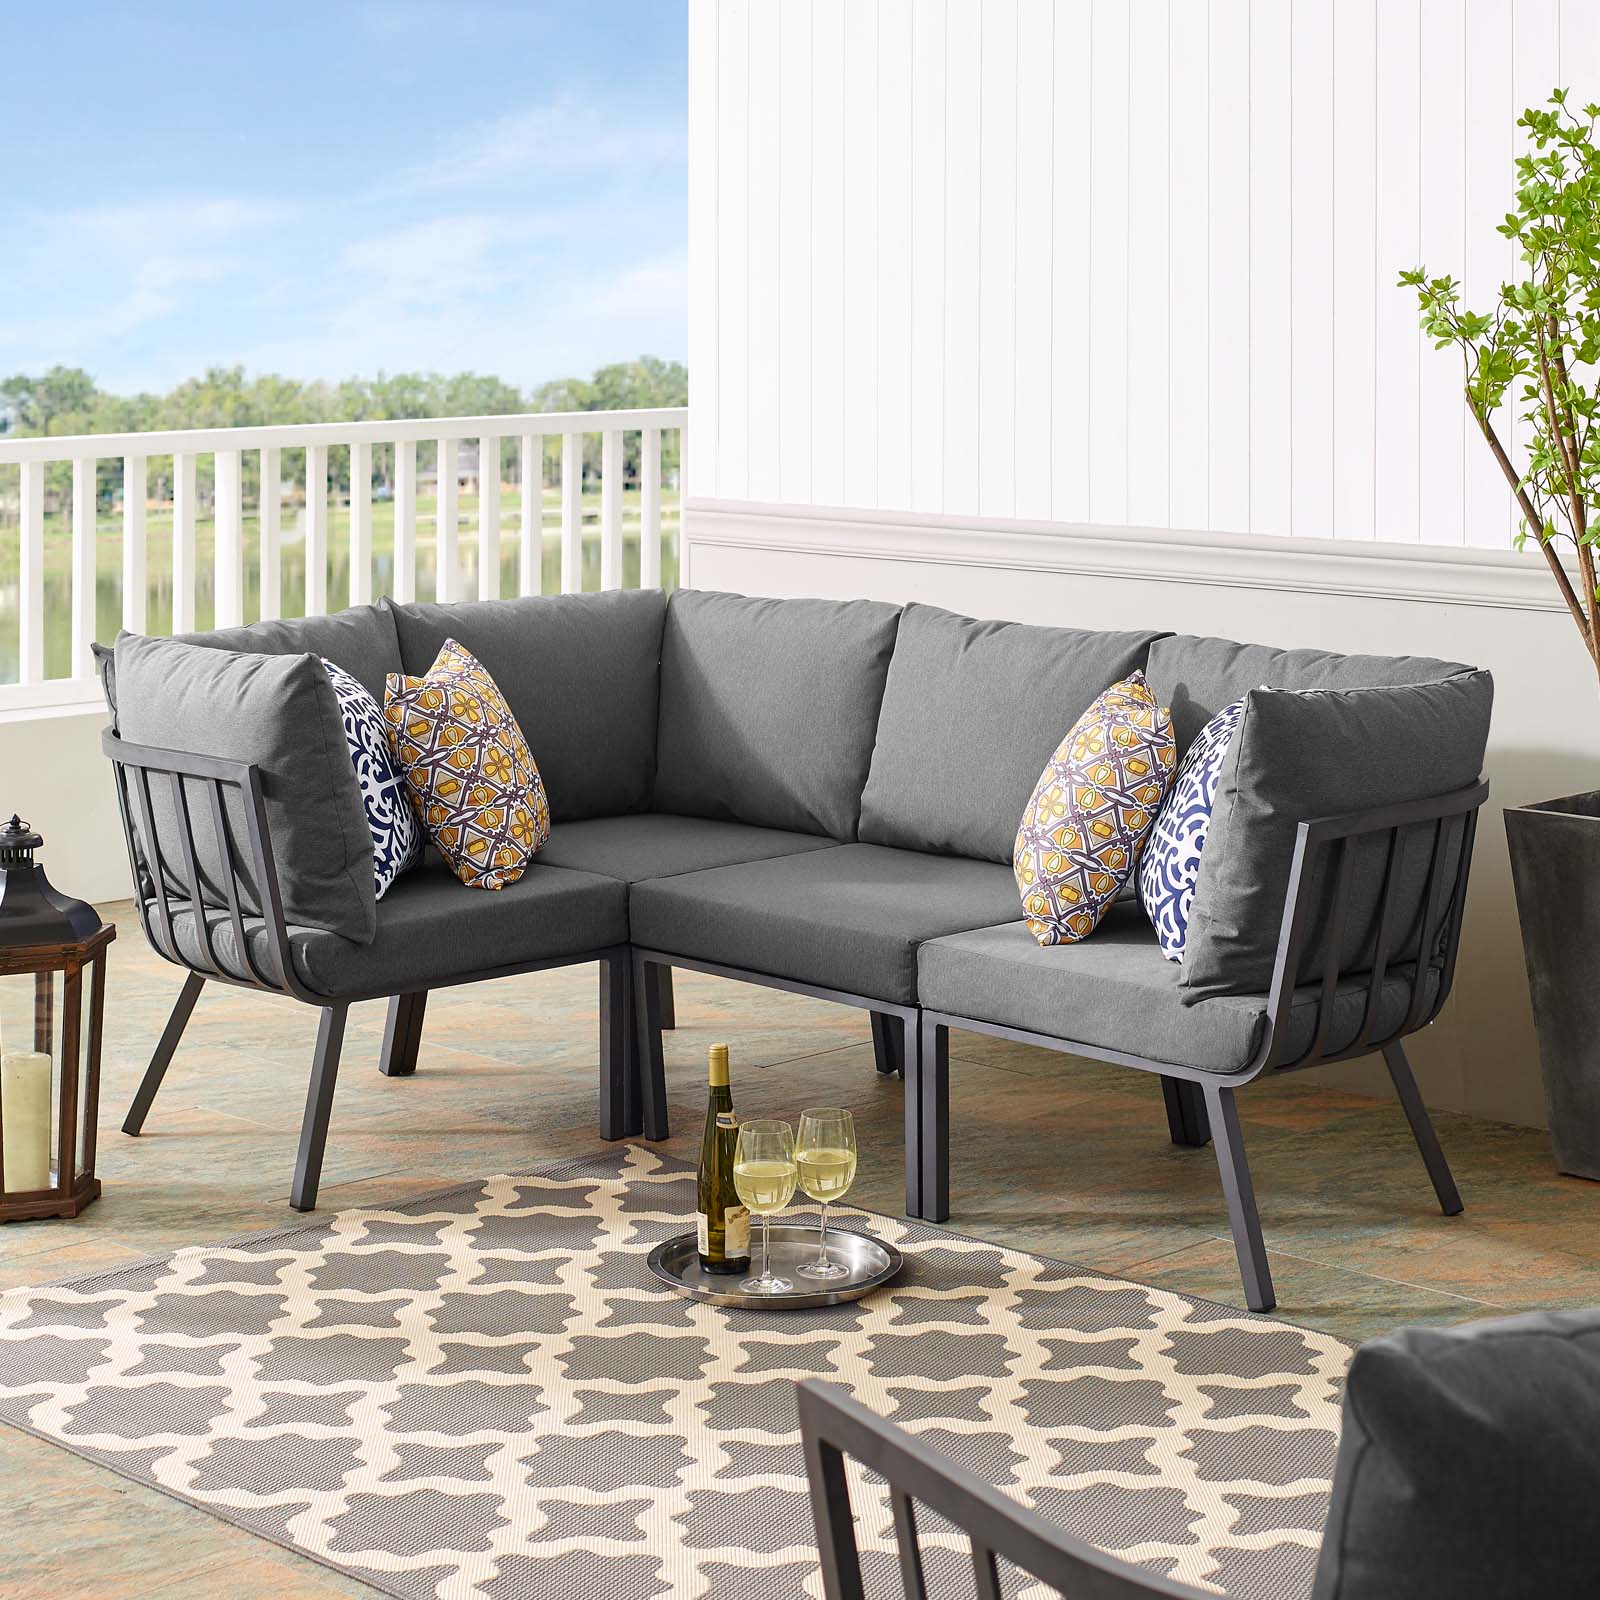 Modway Riverside 4 Piece Outdoor Patio Aluminum Sectional in Gray Charcoal - image 1 of 10